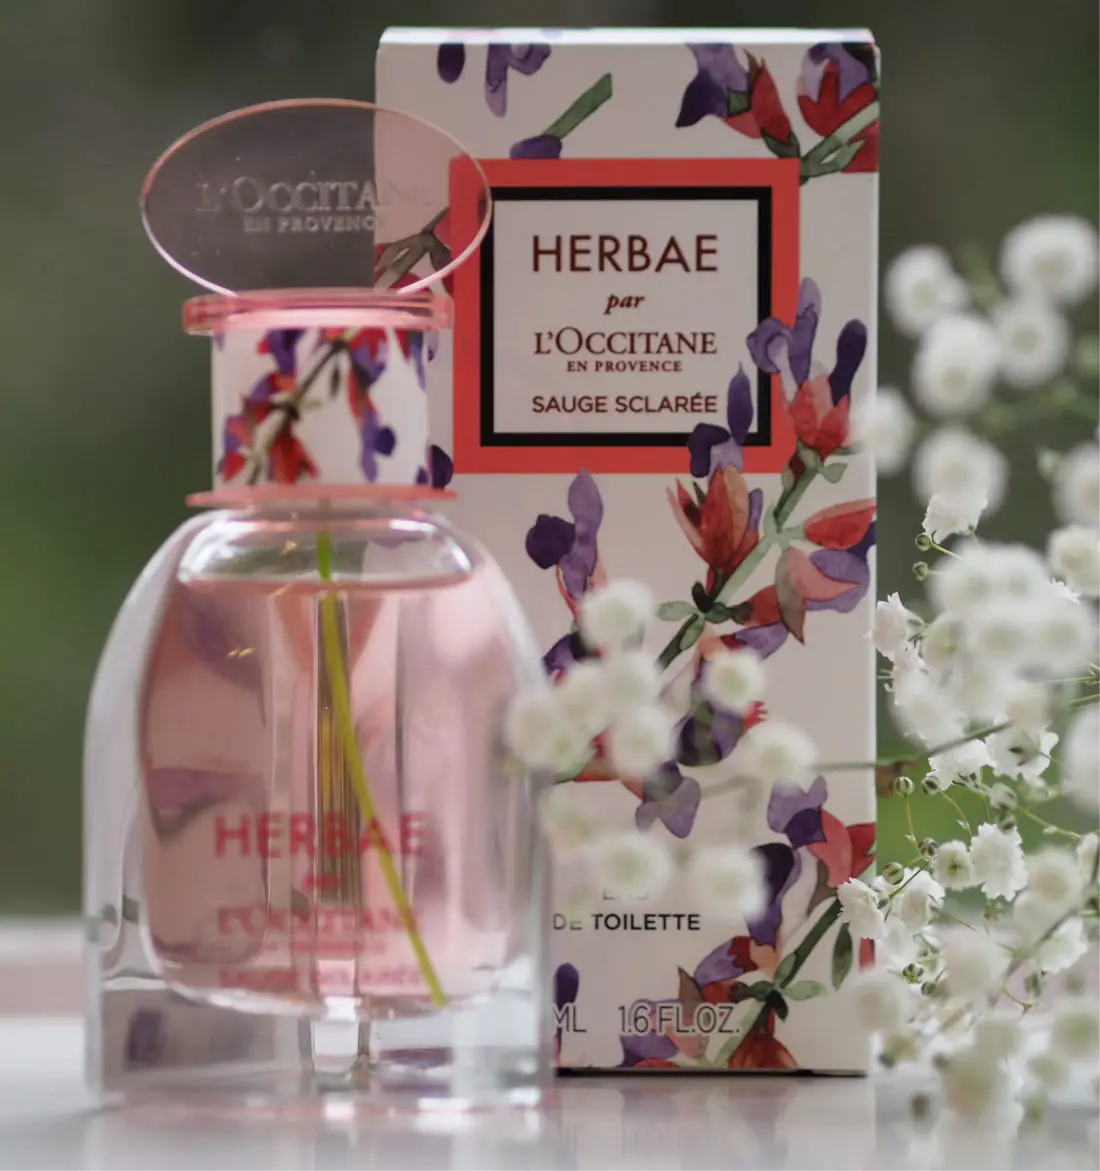 LOccitane Herbae Clary Sage Review